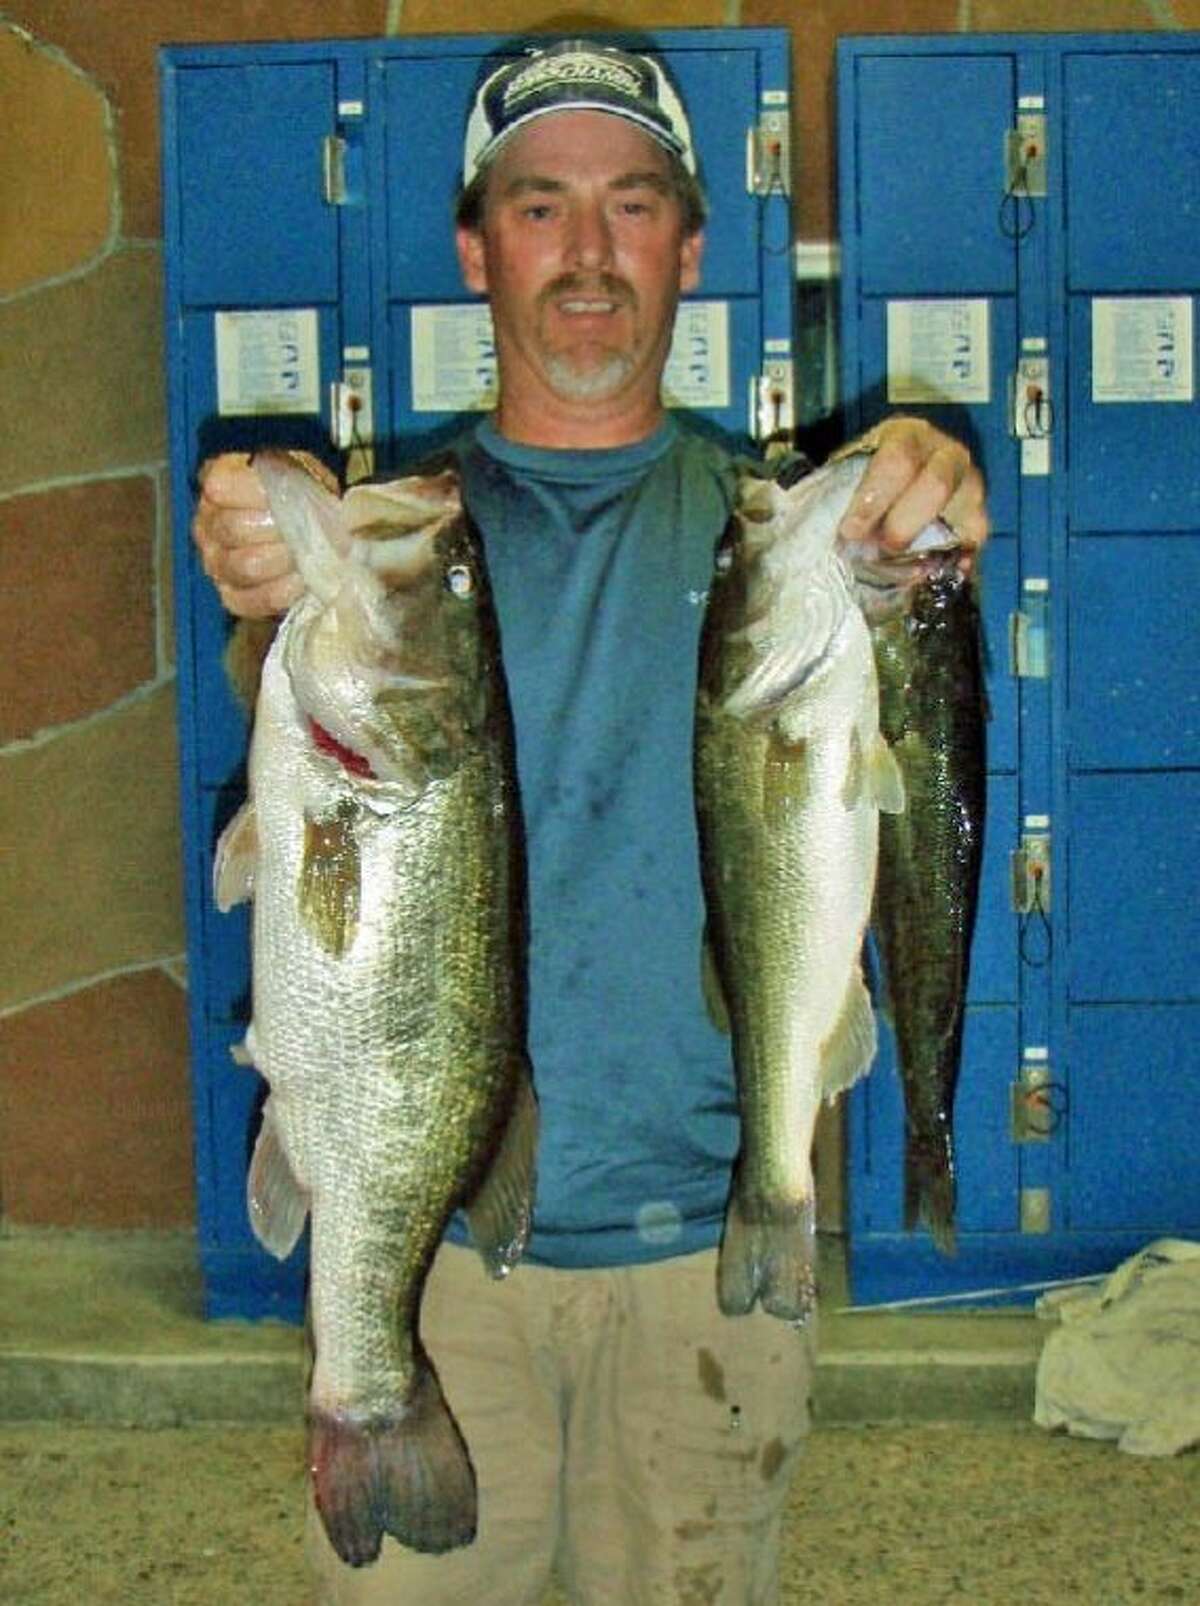 Mike Power and Chris Russell won the Conroe Bass Tuesday Night Tournament on July 23 with a stringer weighing 13.20 pounds.